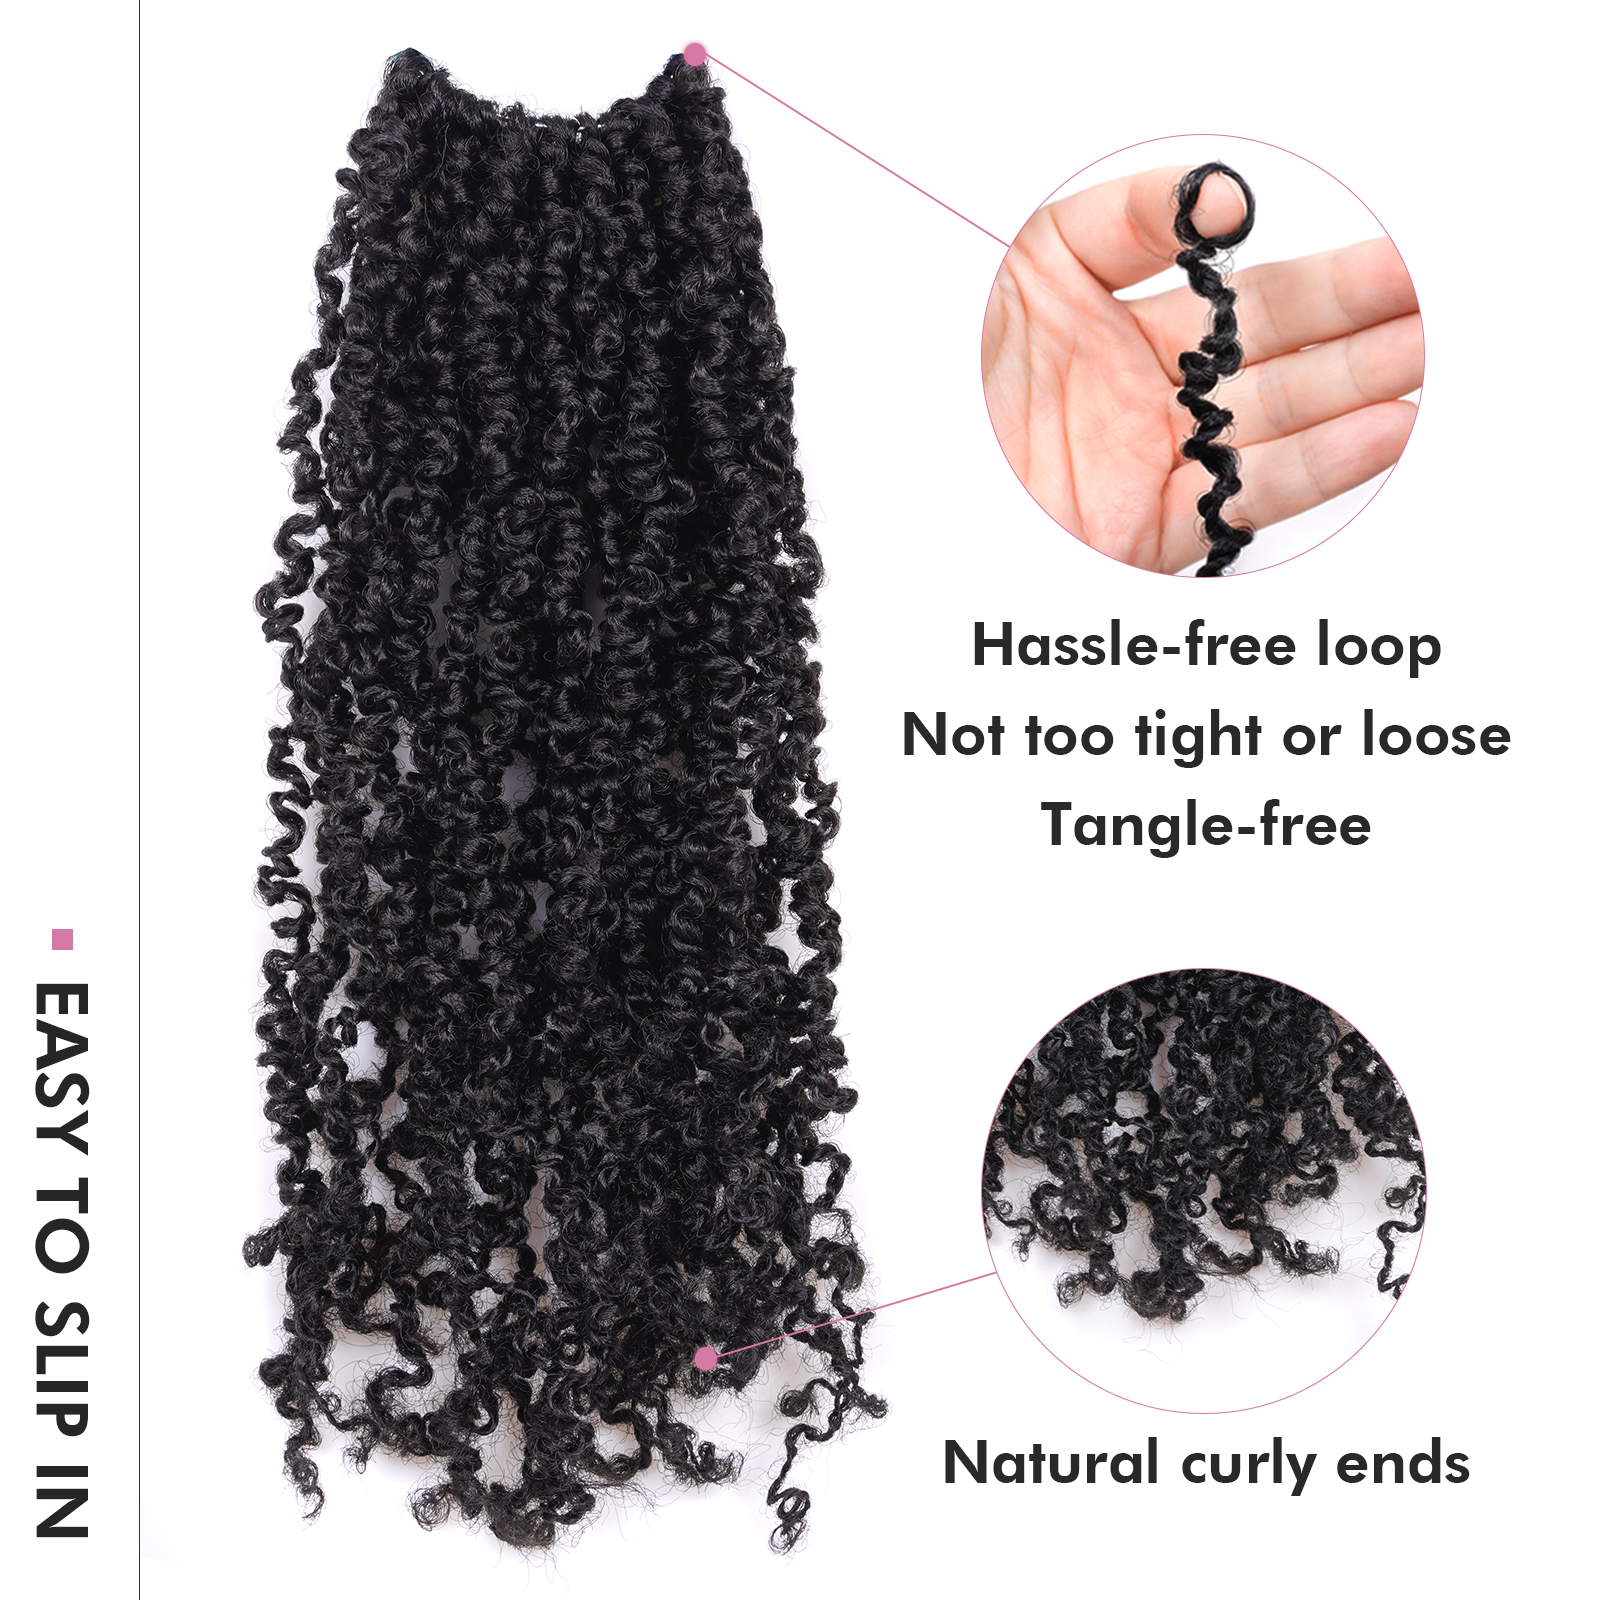 TOYOTRESS 8-16 Inch Yanky Twist 8 Packs | Yanky Twist Braiding Hair with Curls 8 Packs Fluffy Marlybob Crochet Hair Pre Twisted Short Passion Twist Crochet Braids Synthetic Hair Extensions for Women